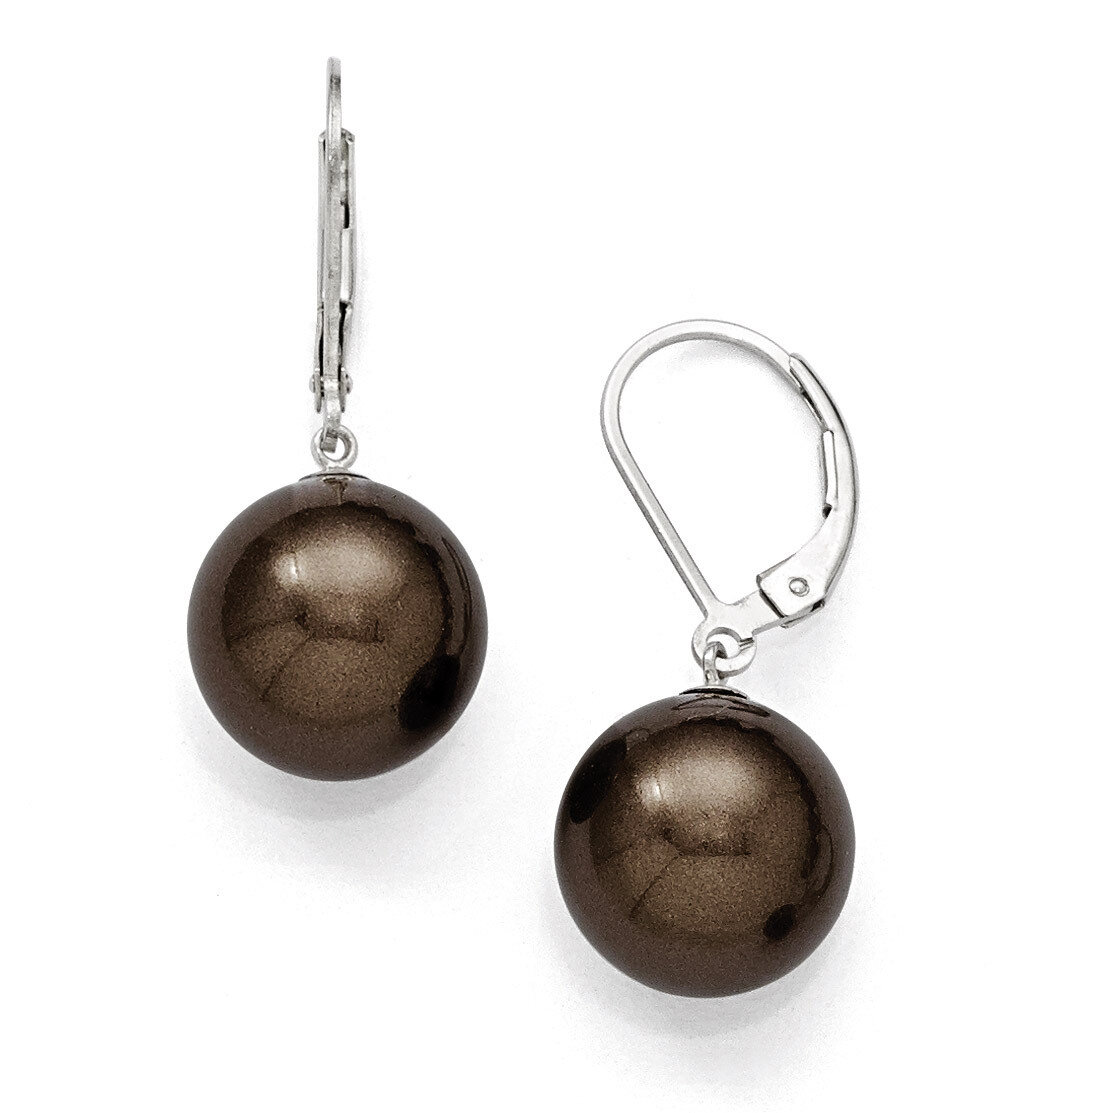 12-13Mm Round Brown Shell Bead Leverback Earrings Sterling Silver QMJEL12C